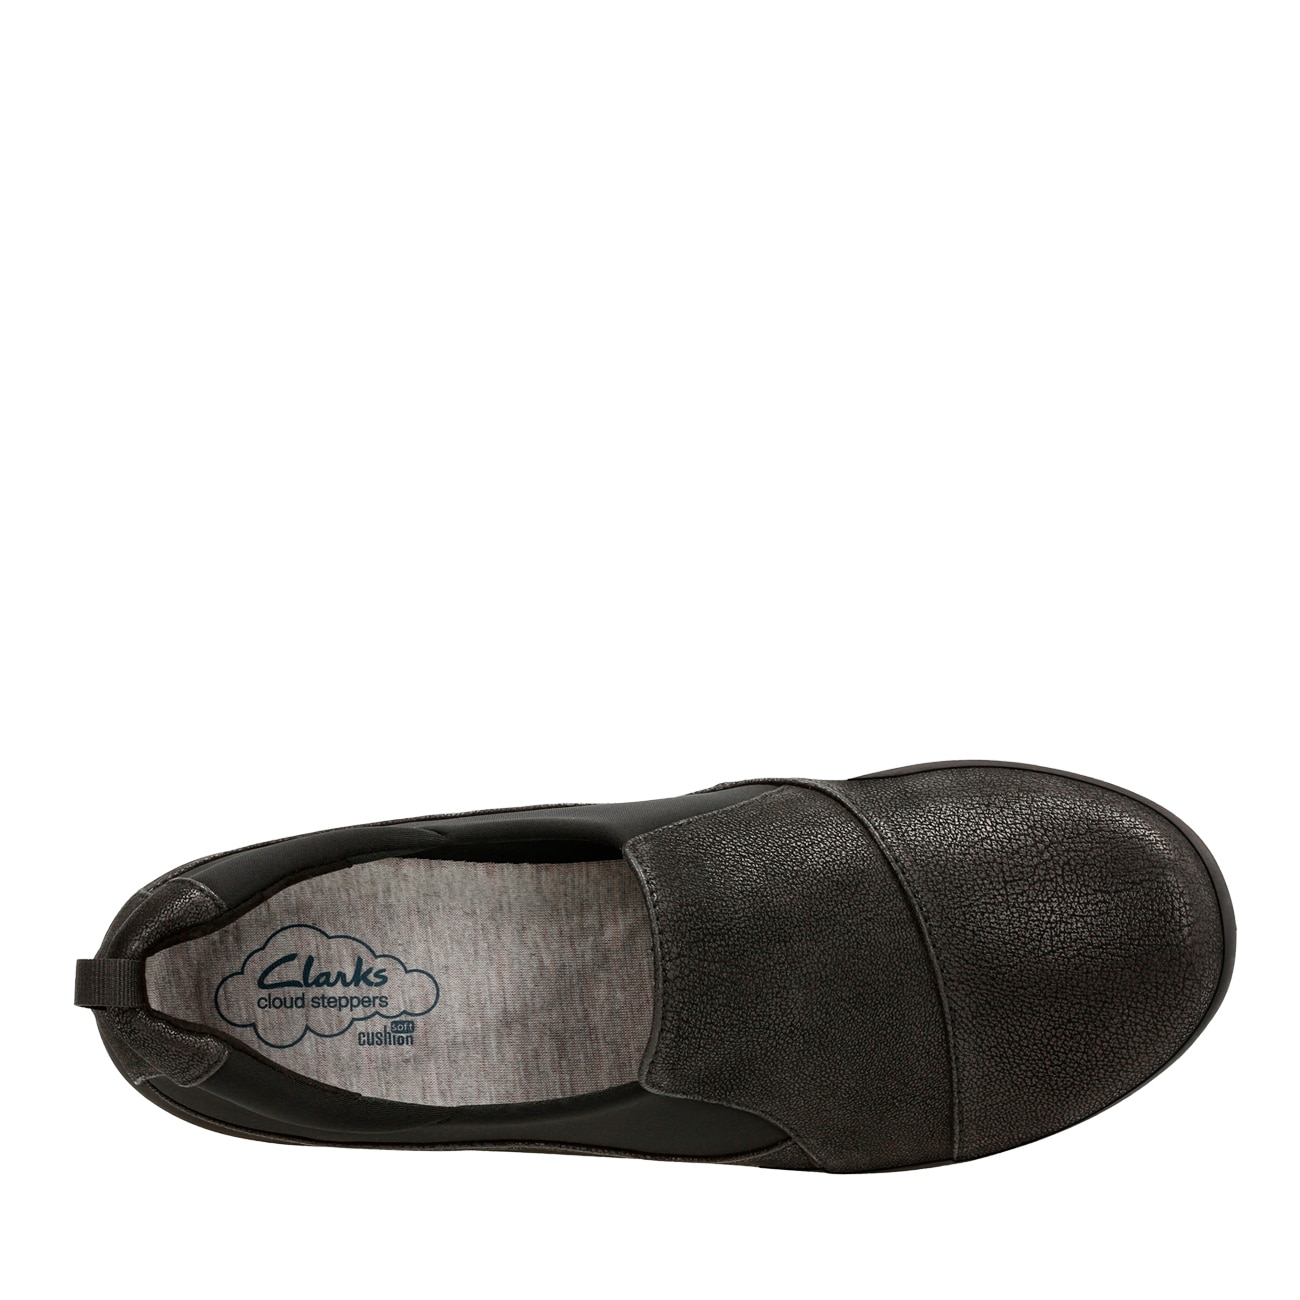 clarks cloudsteppers replacement insoles